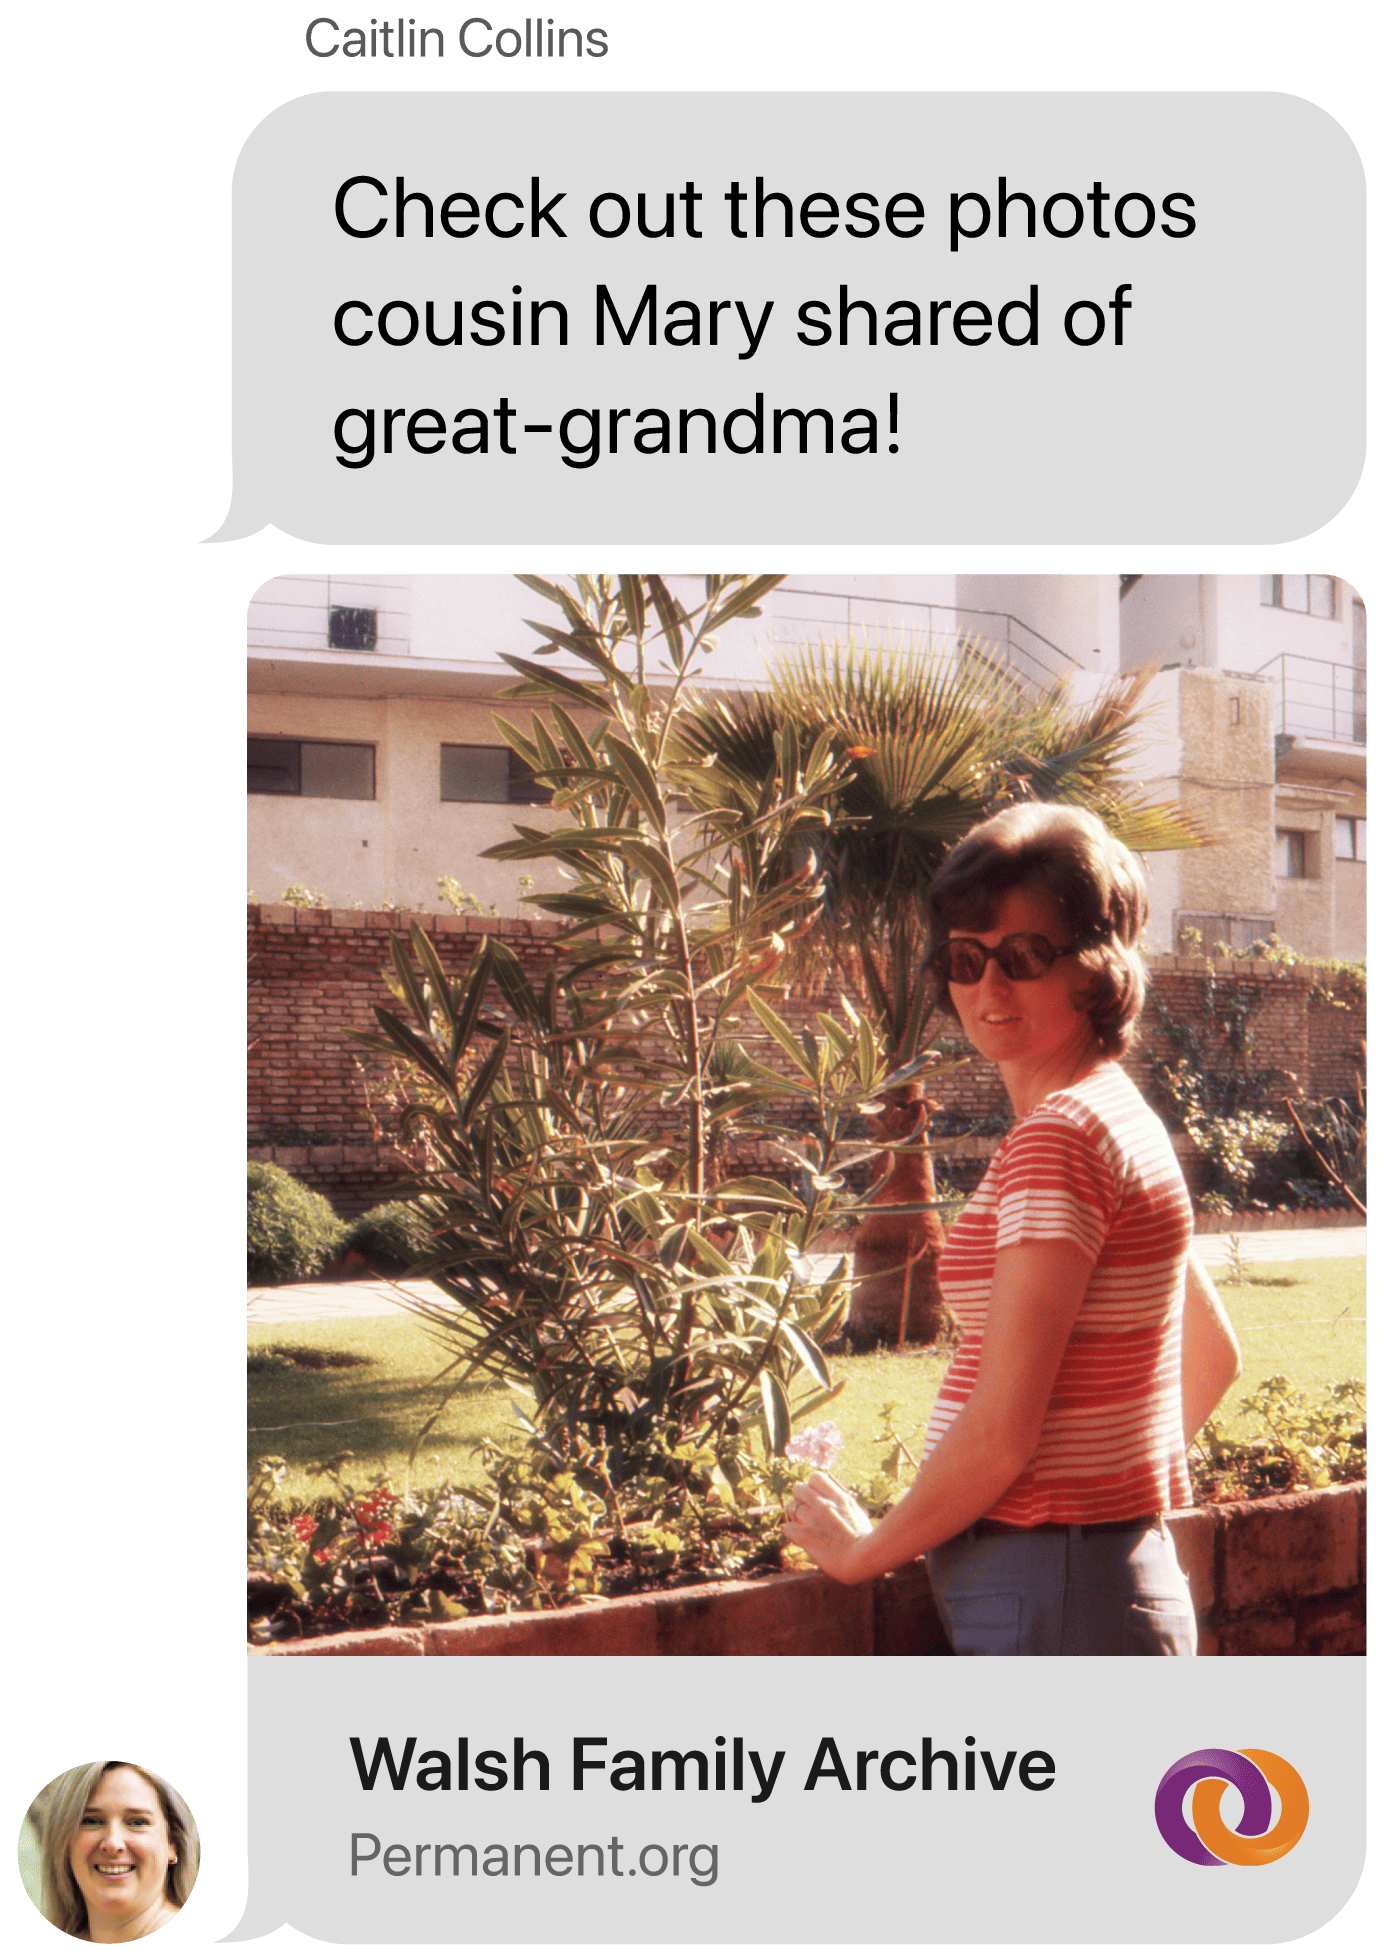 Caitlin Collins texting ‘Check out these photos cousin Mary shared of great-grandma!’ from the Walsh Family Archive with Katherine Walsh. Katherine responds ‘Wow, these are great’